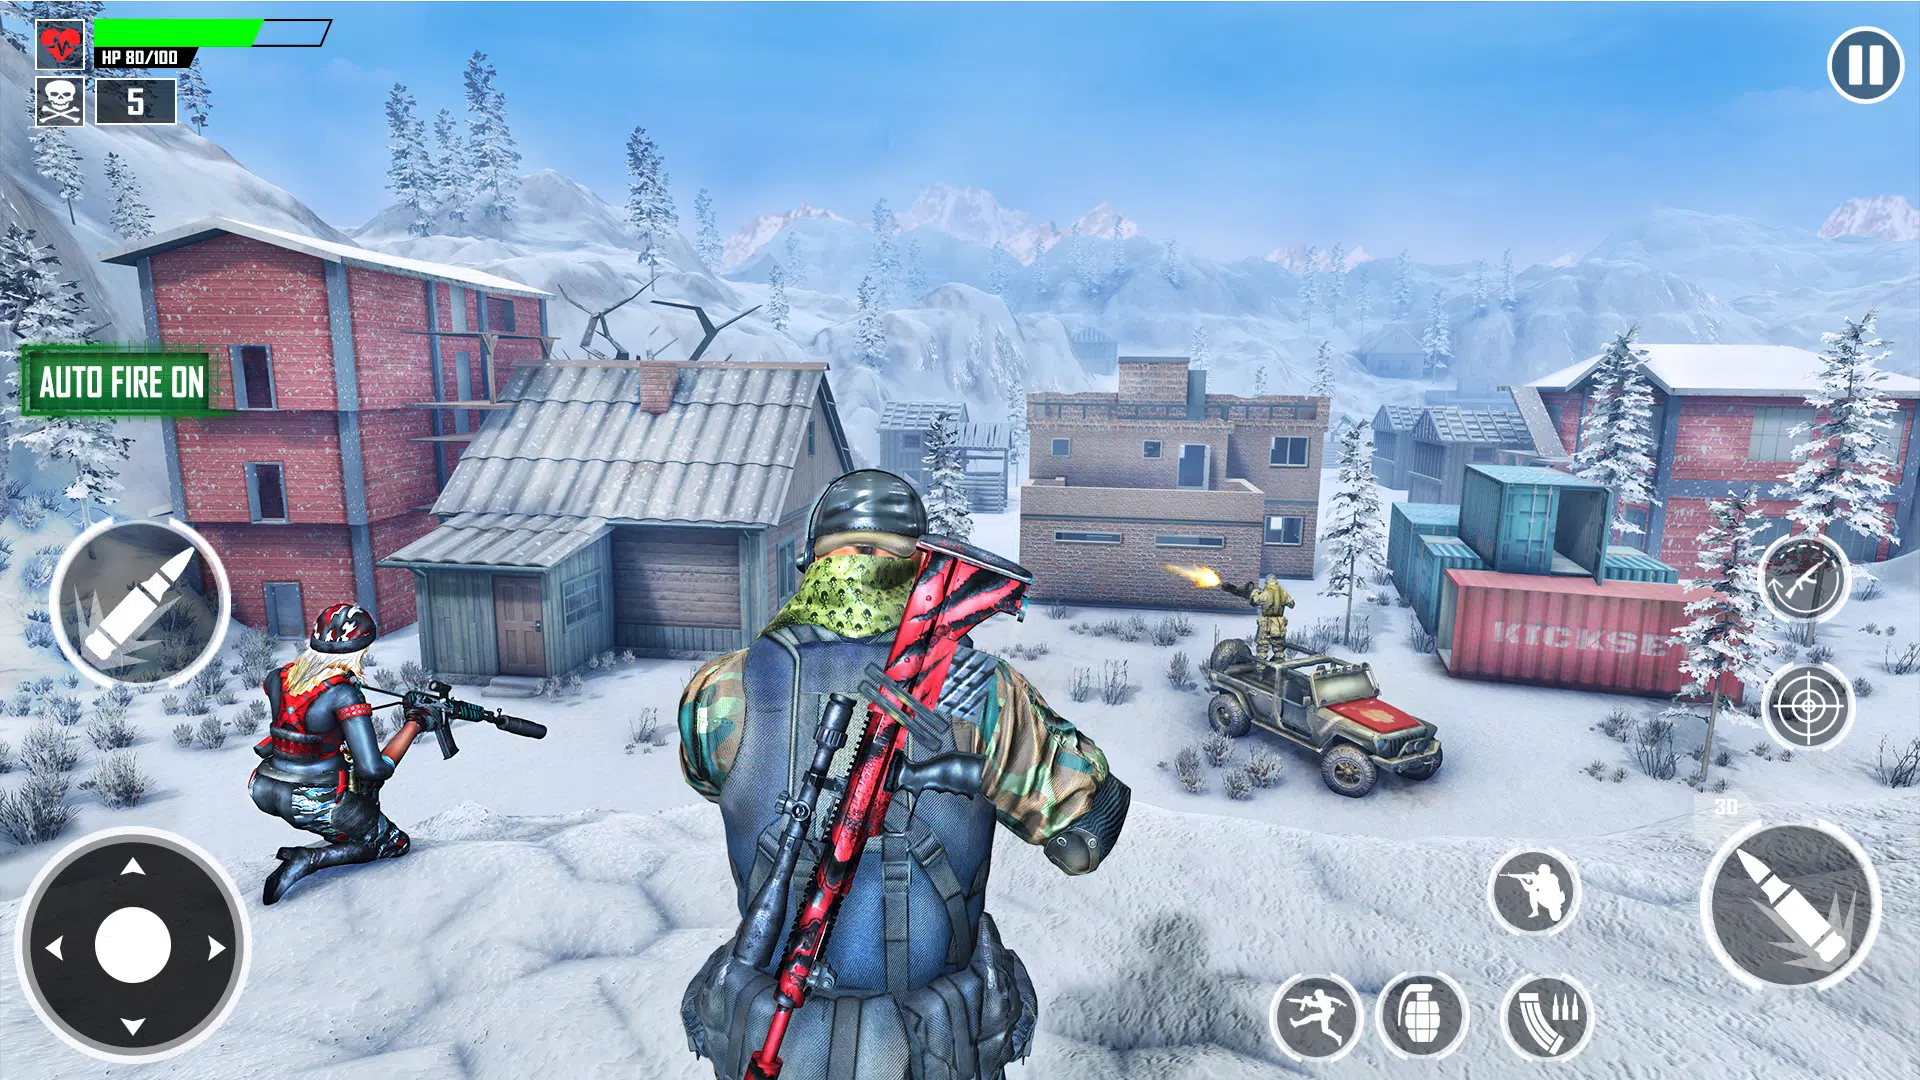 FPS Shooting Games : Gun Games APK for Android Download